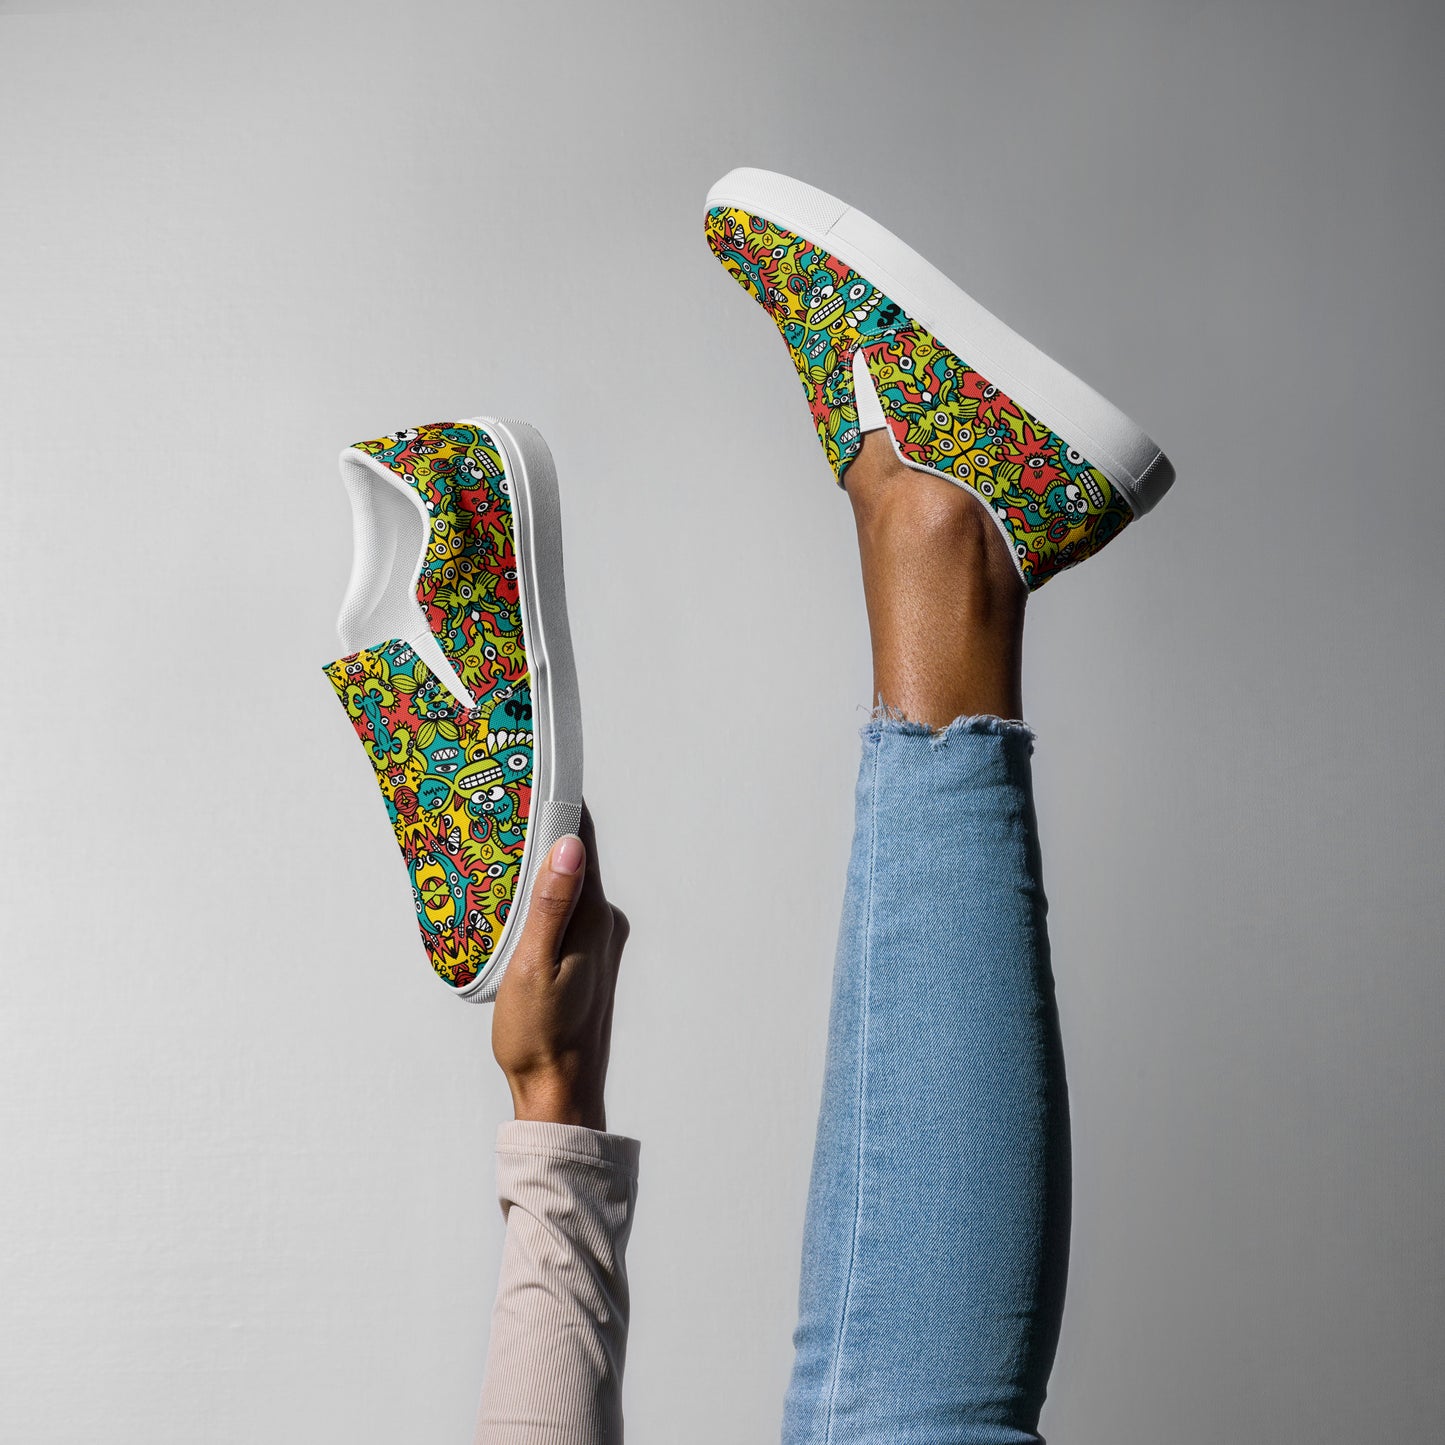 Doodle Dreamscape: Cosmic Critter Carnival - Women’s slip-on canvas shoes. Overview